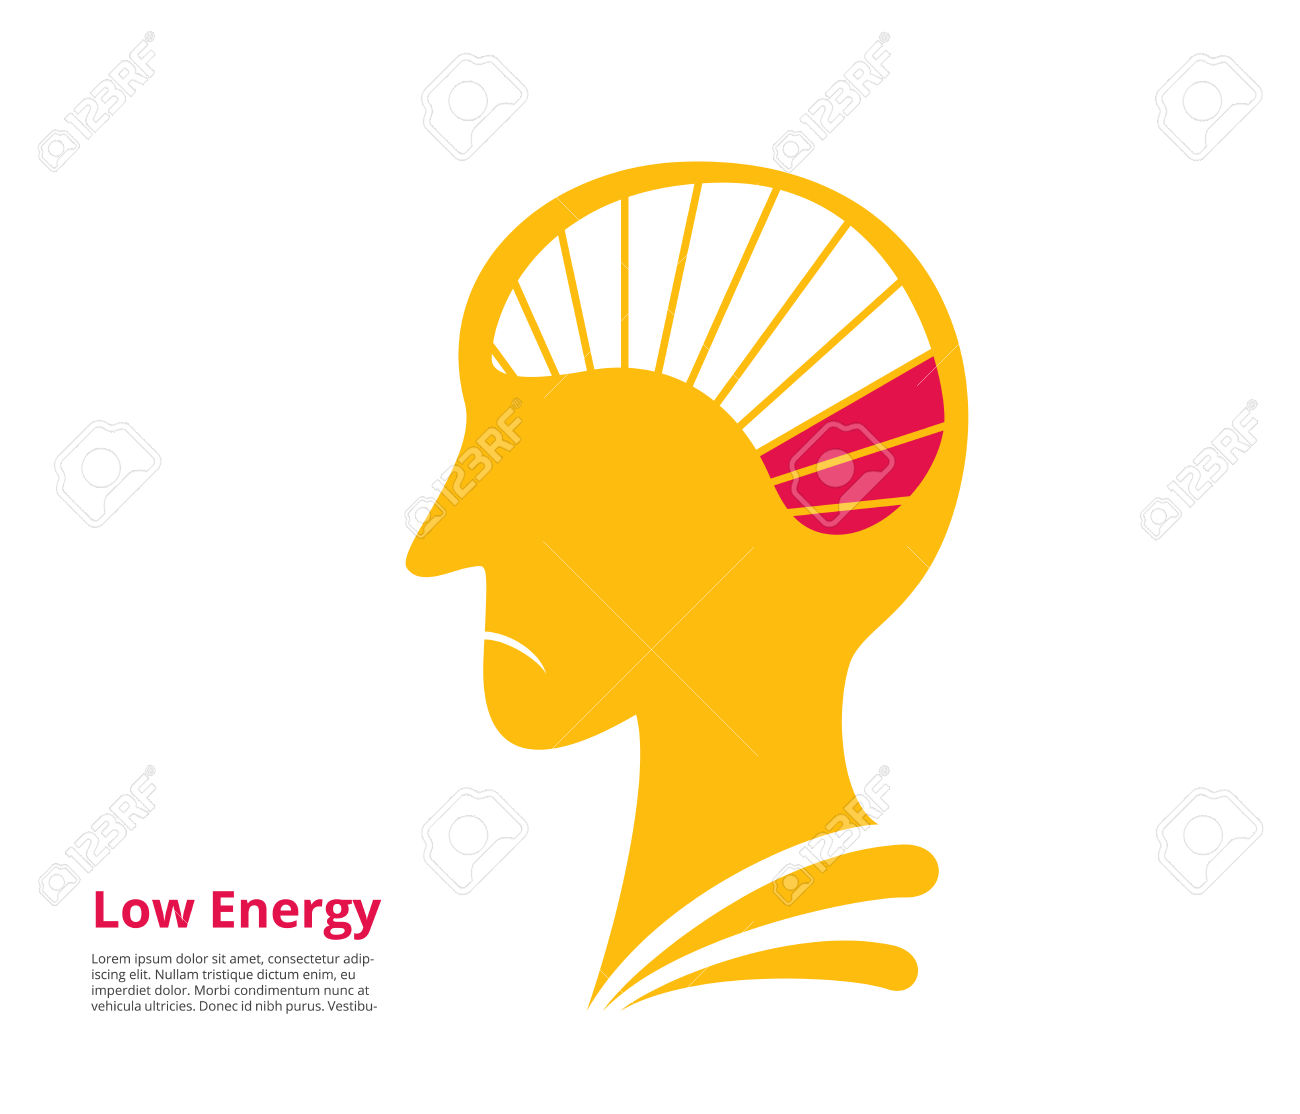 Low Energy, Low Power Of Brain. Vector Illustration Royalty Free.